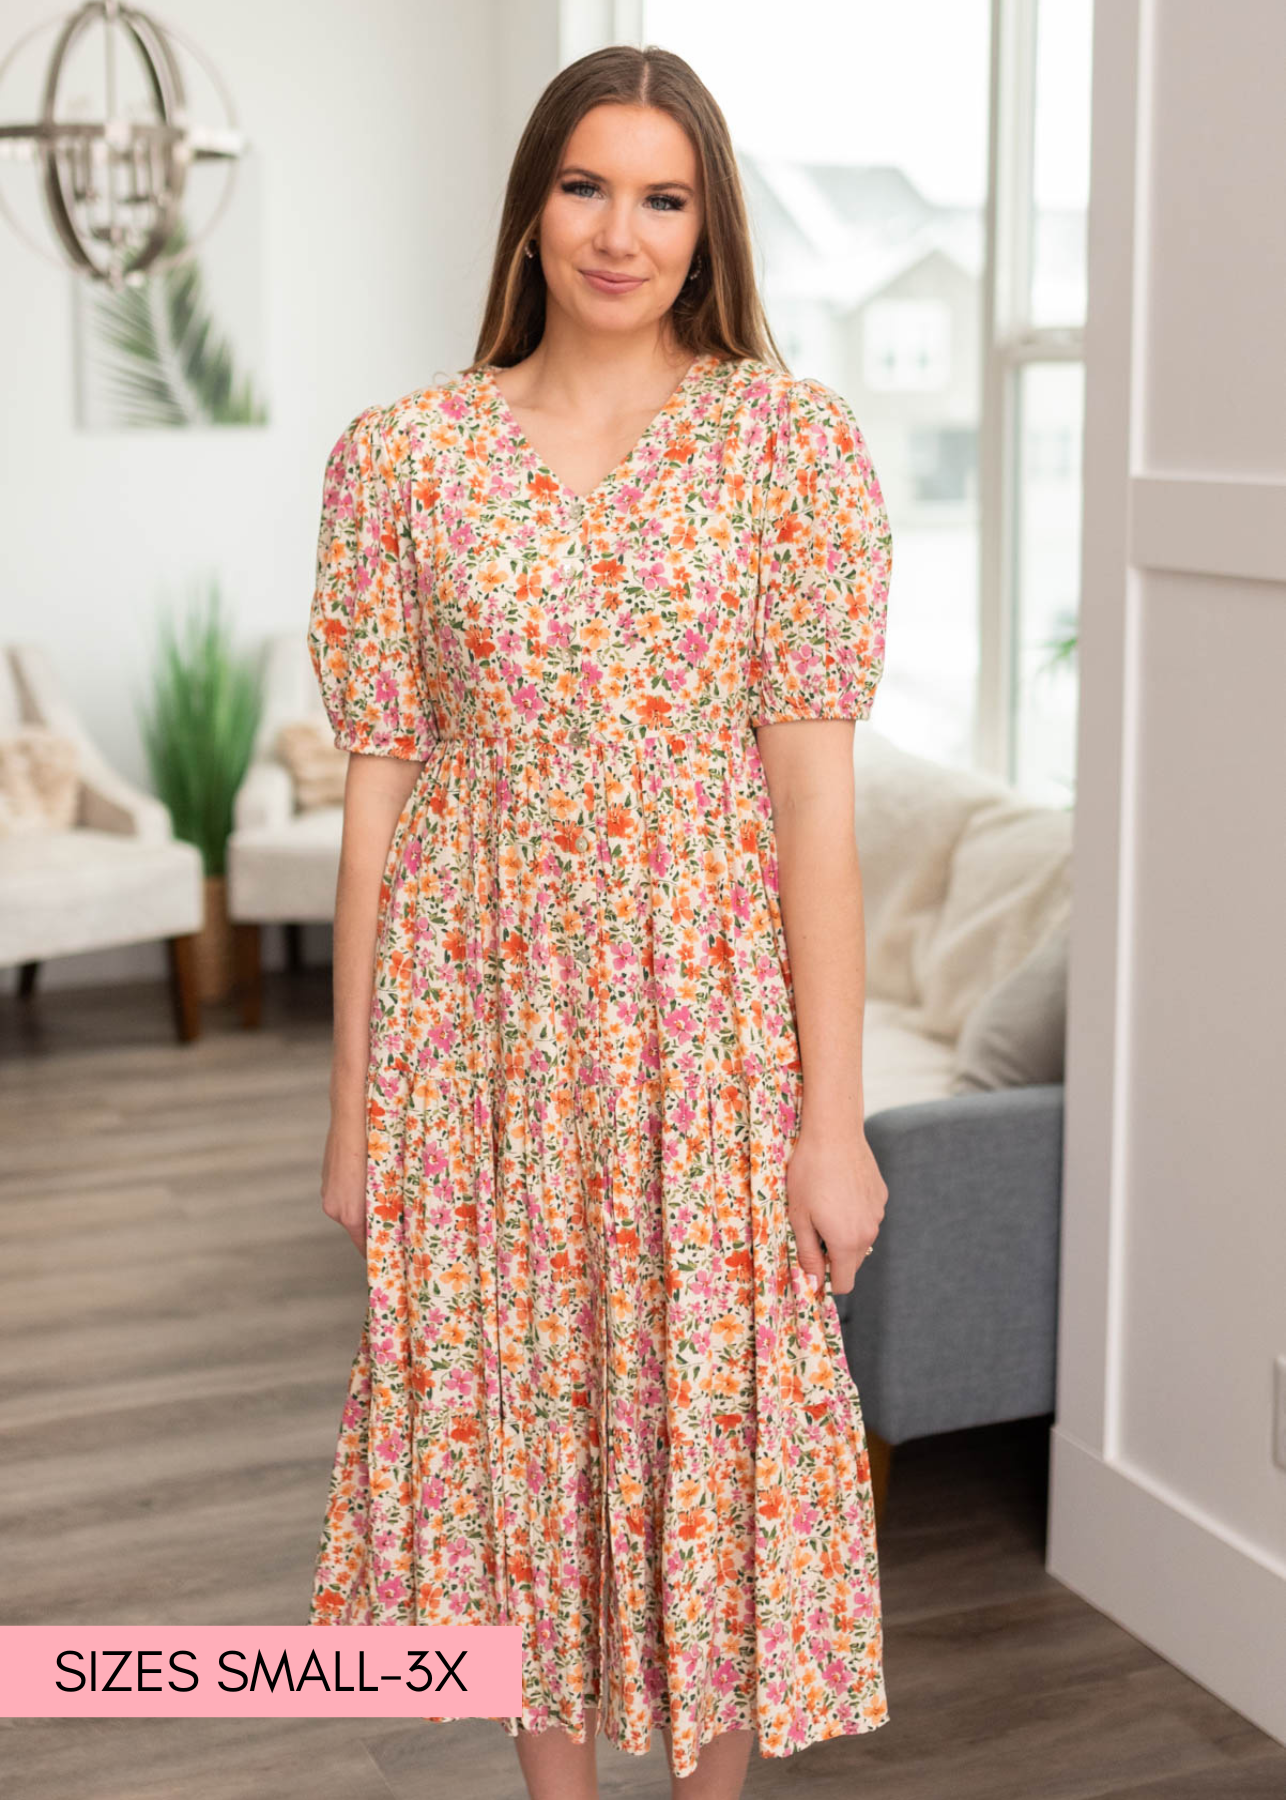 Apricot floral dress that buttons up and has short sleeves